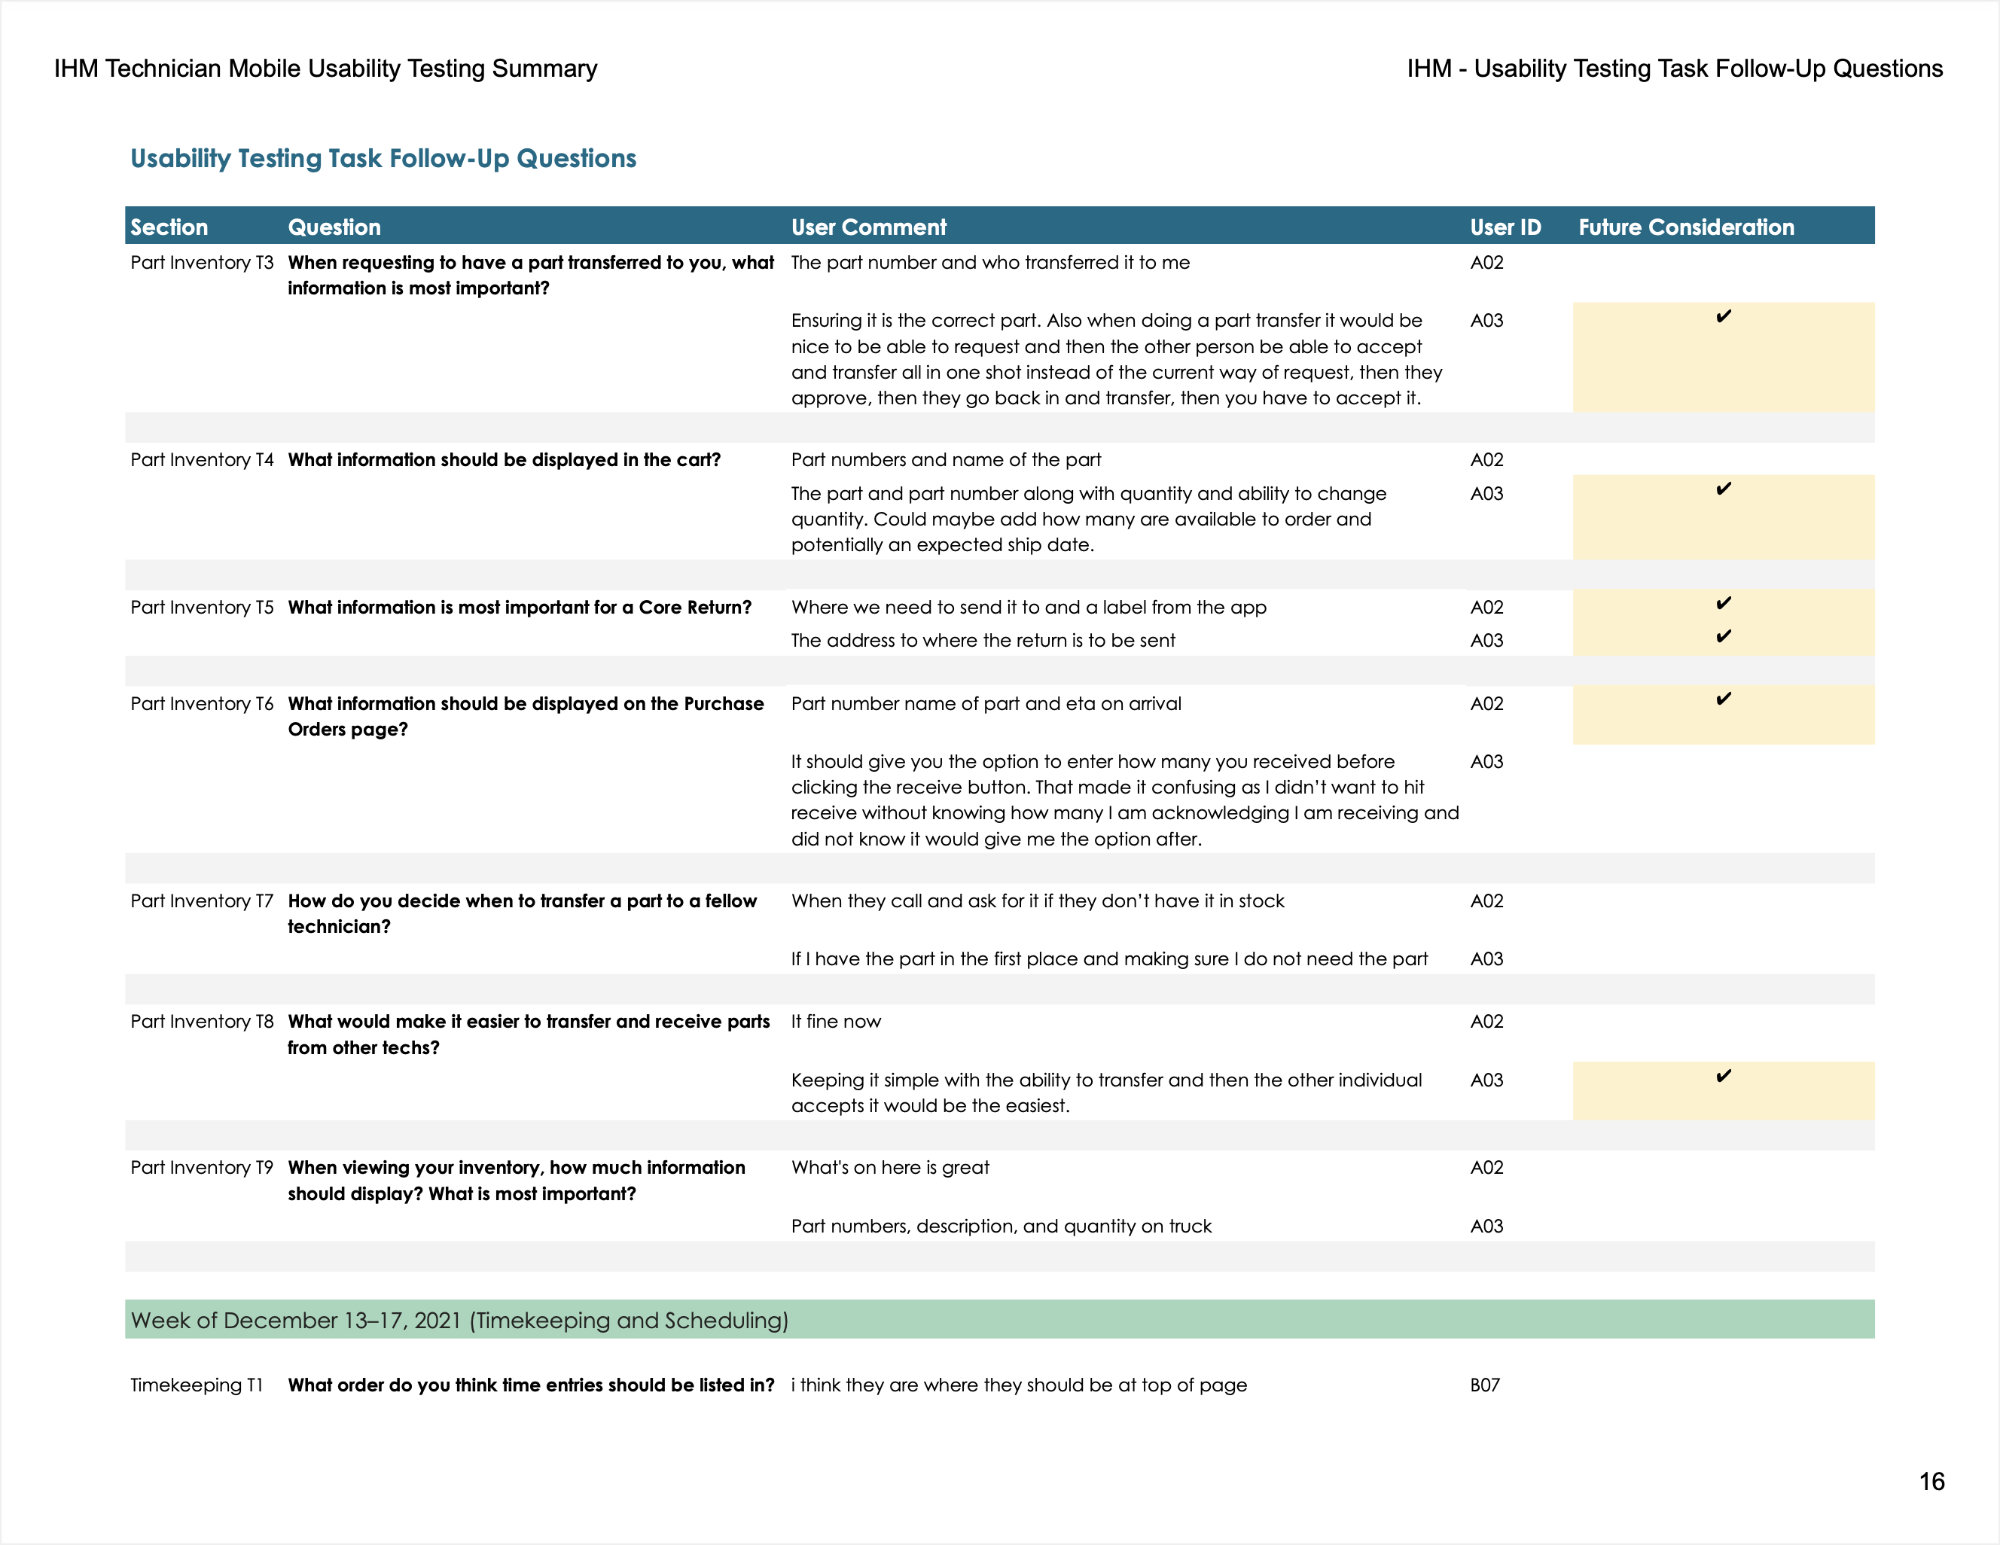 Screenshot of Usability Testing Task Follow-Up Questions